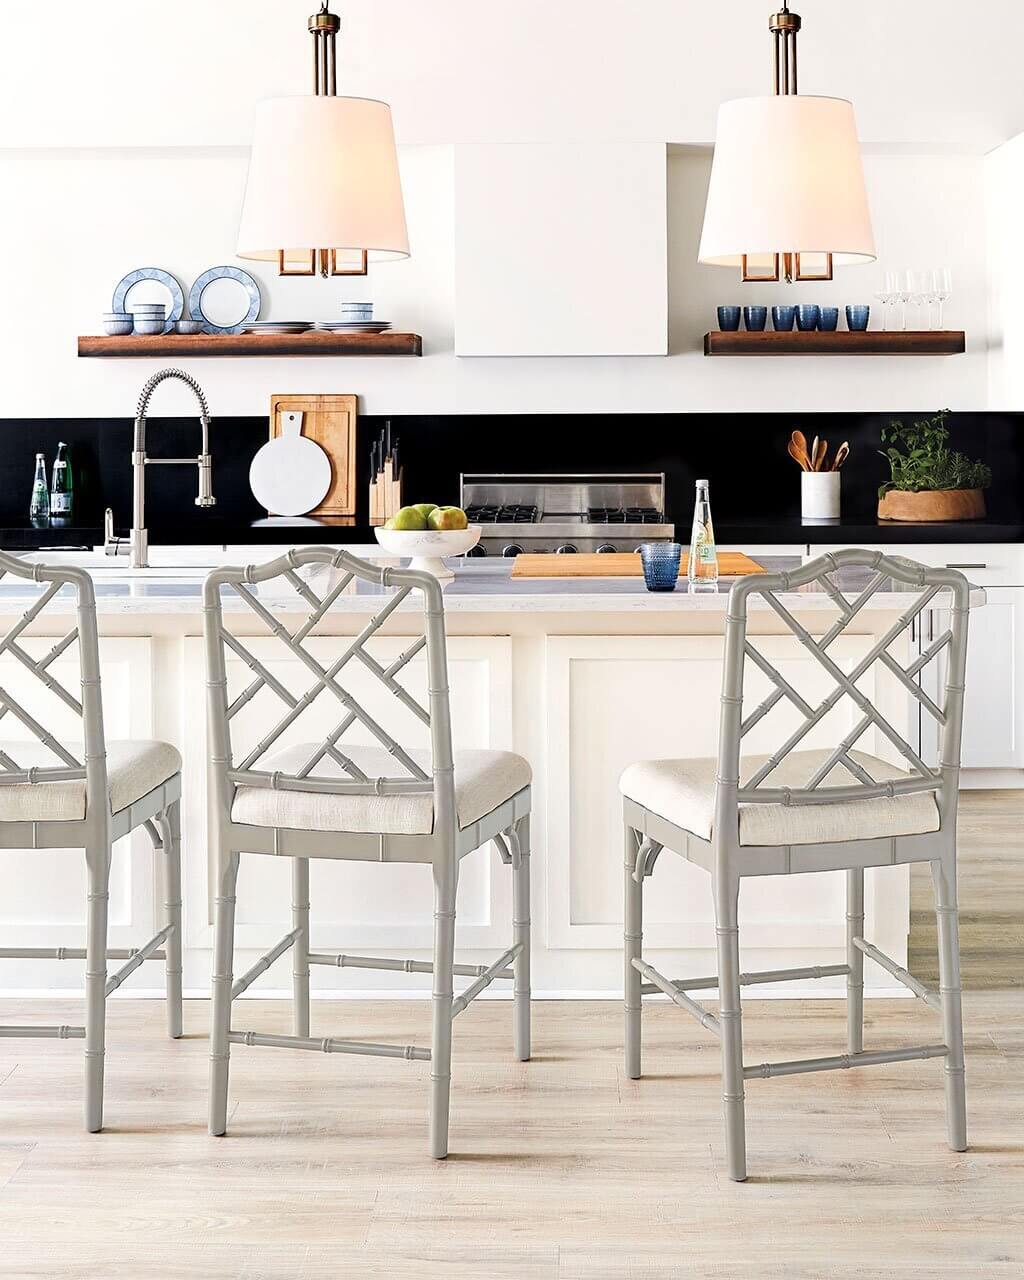 A white kitchen with a center island and three chairs
